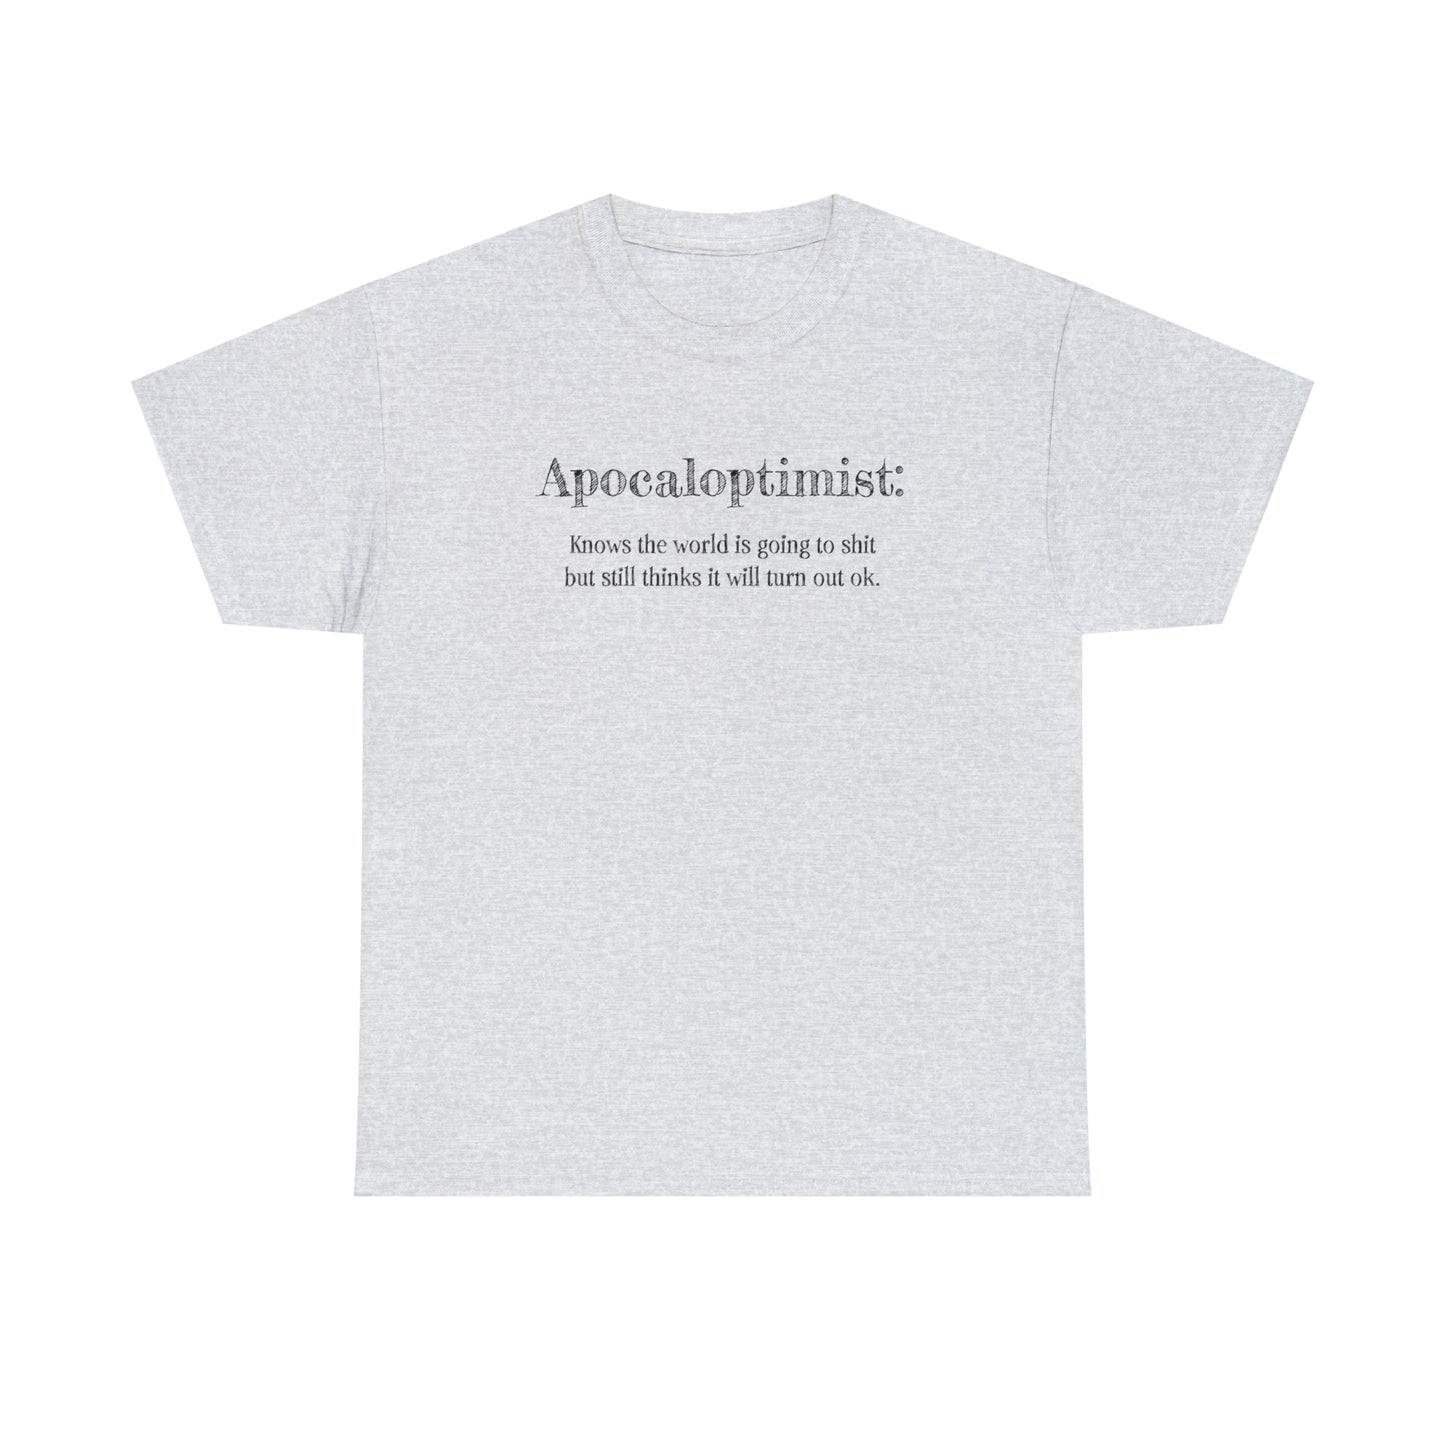 Apocaloptimist T-Shirt For Optimistic TShirt For Funny Apocalypse T Shirt For End Of The World Shirt For Zombie Apocalypse Shirt For Optimistic Gift